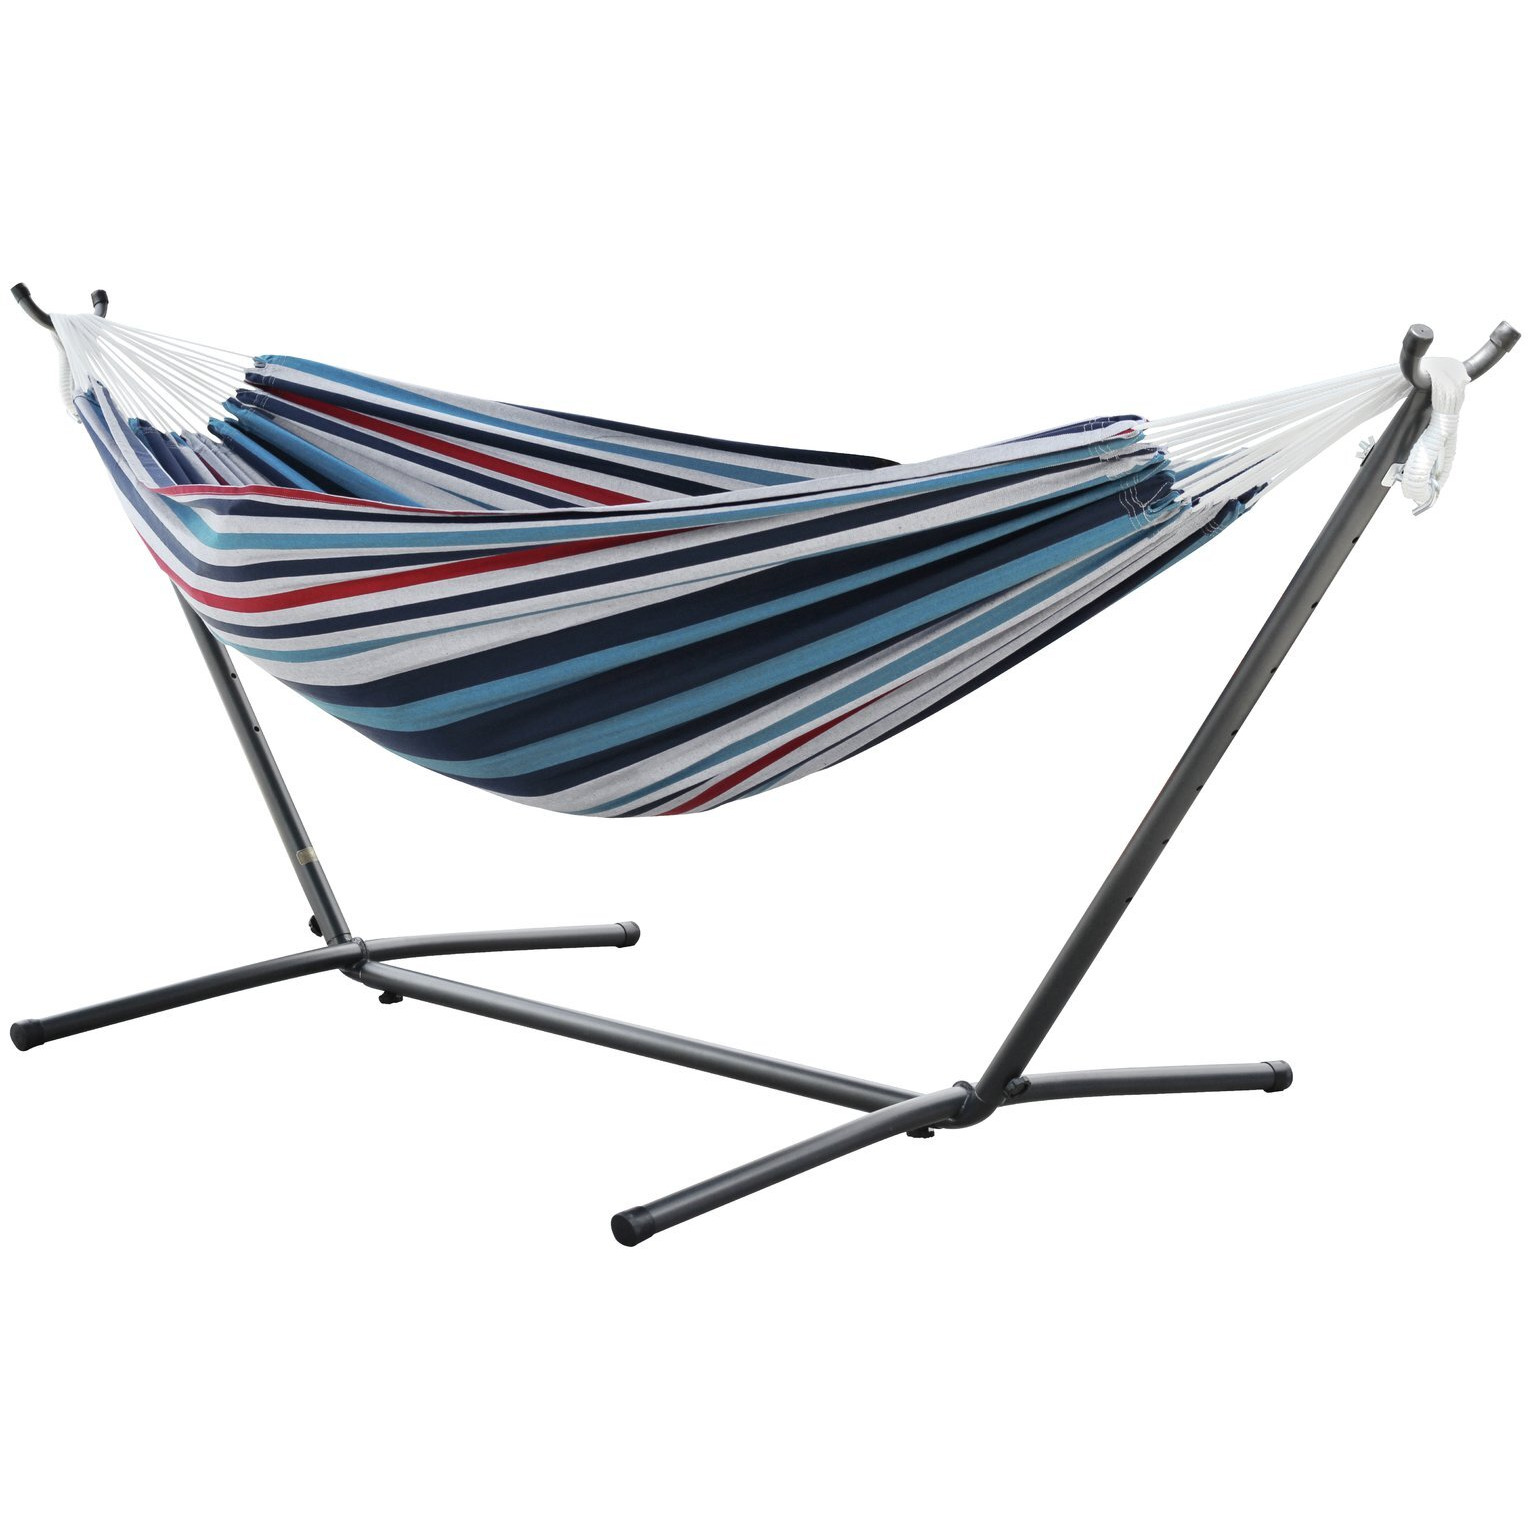 Vivere Denim Double Hammock with Metal Stand - image 1